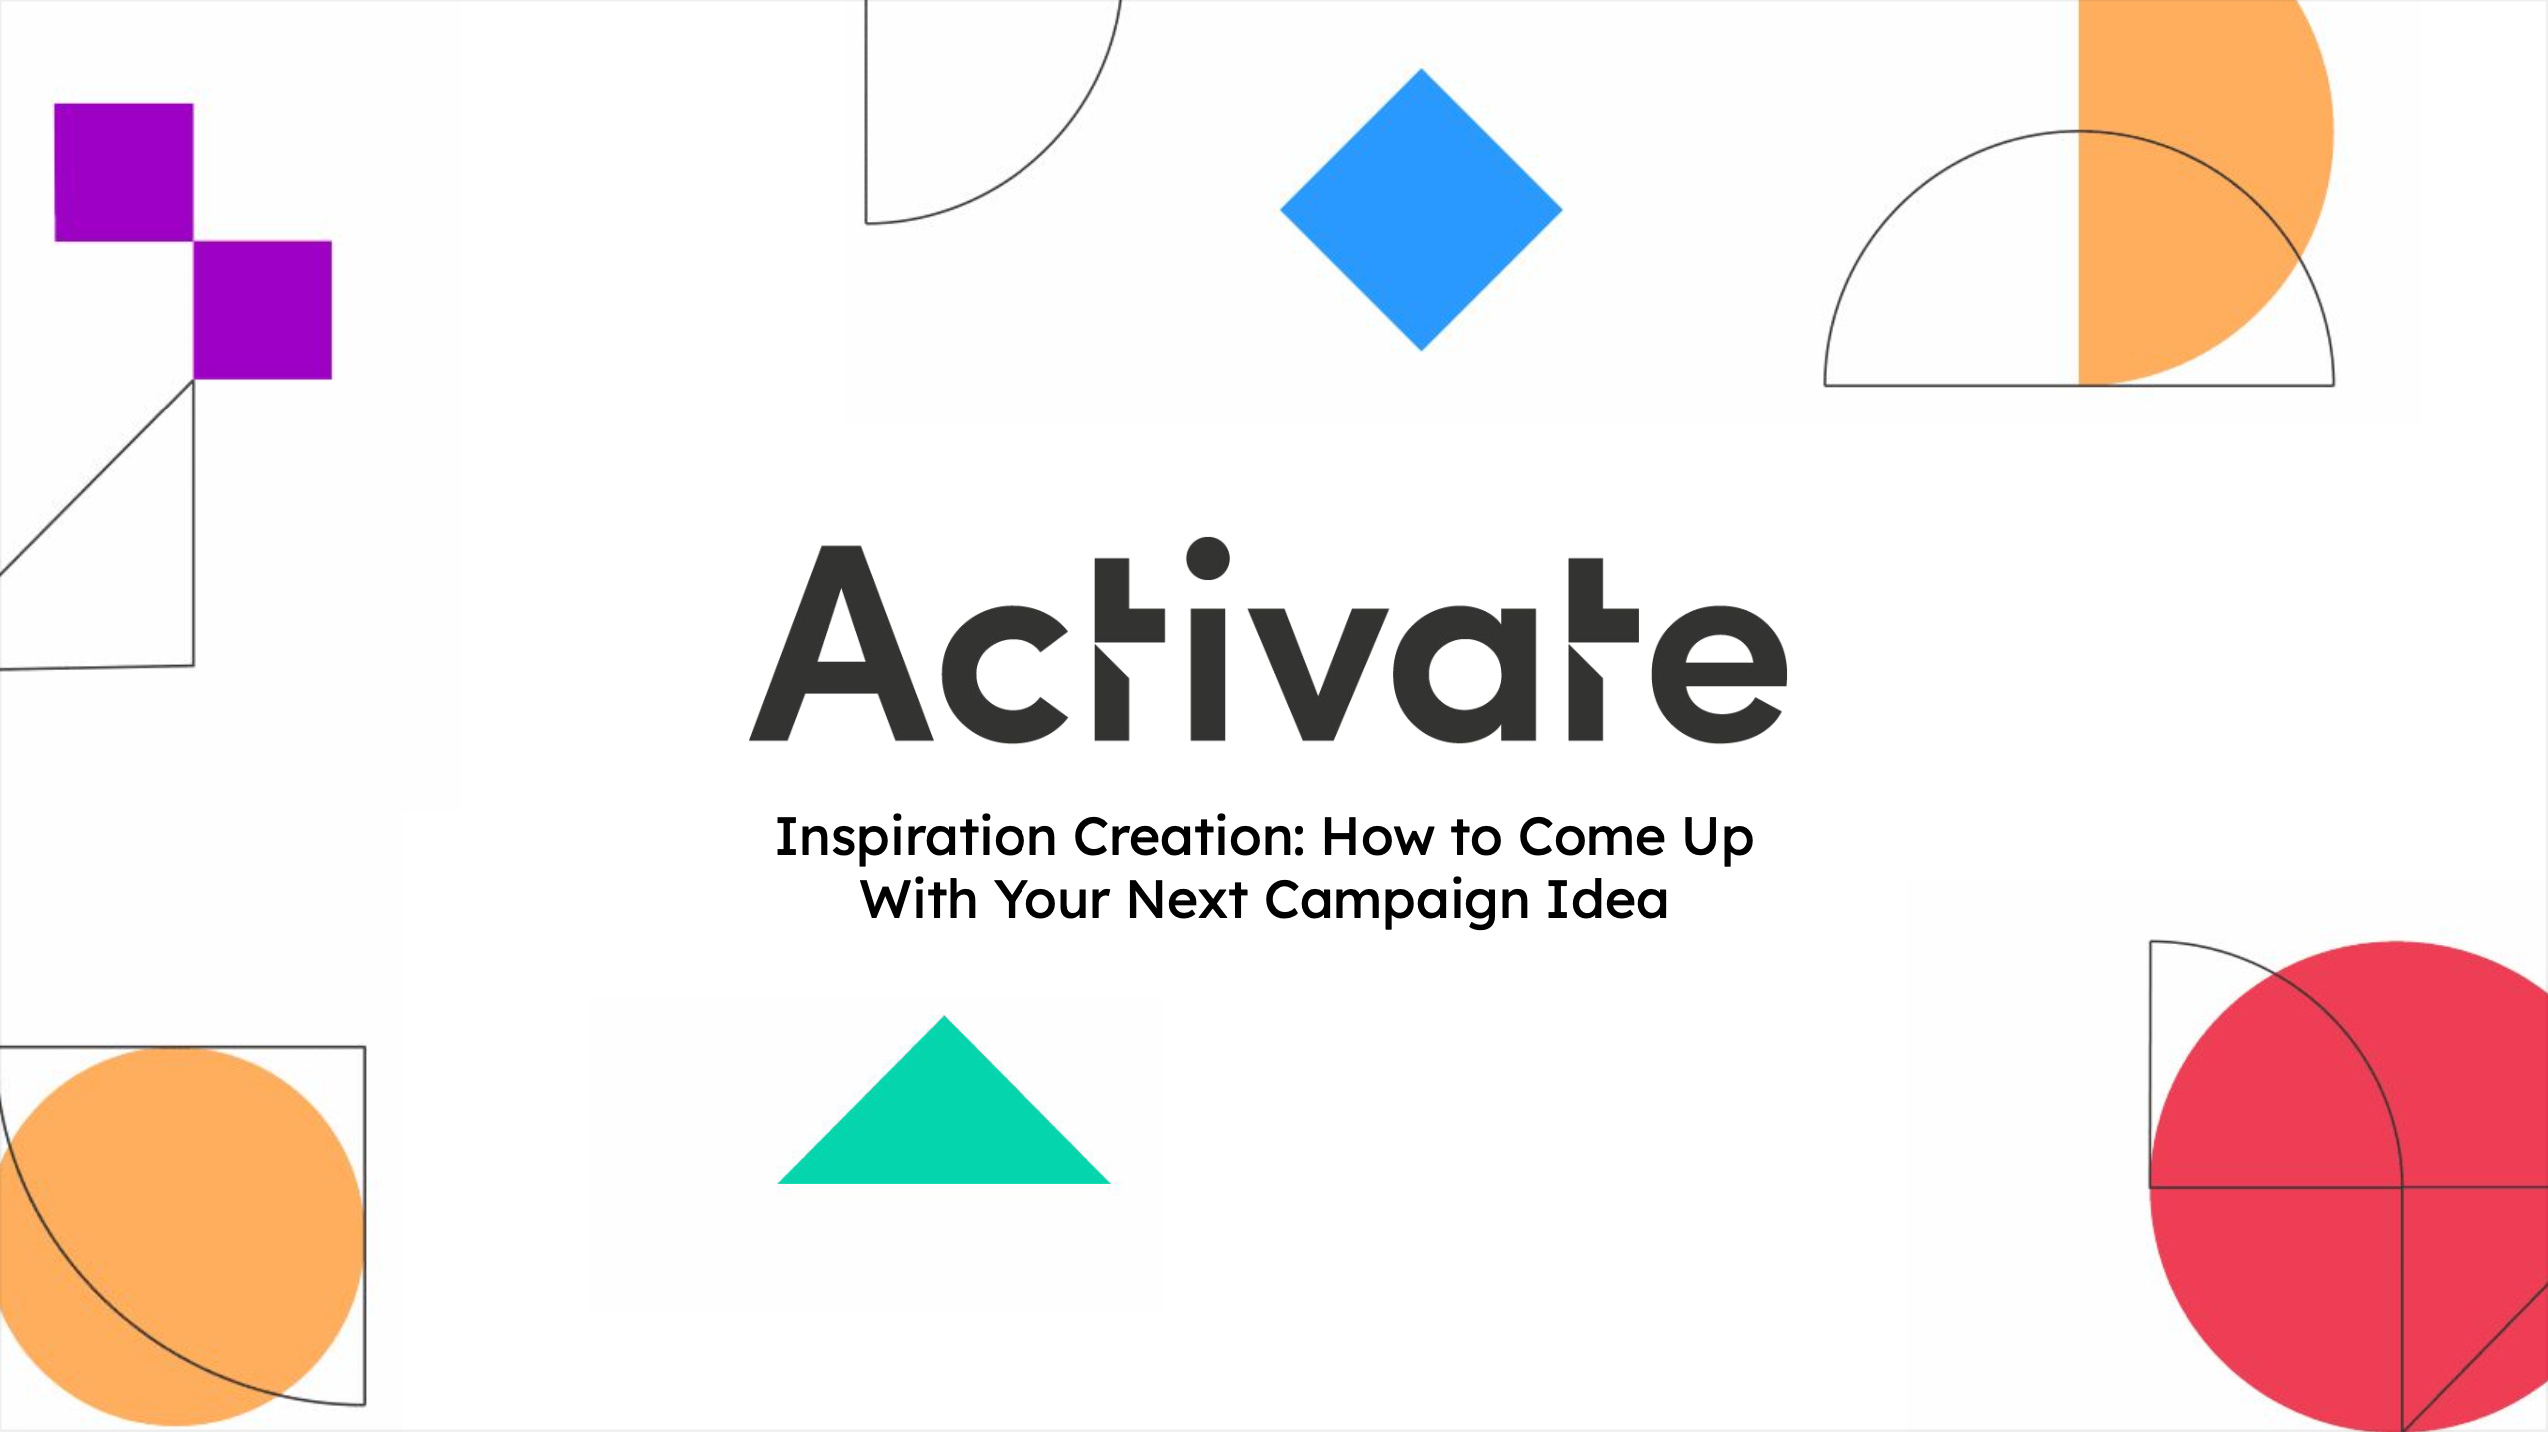 Inspiration Creation: How to Come Up With Your Next Campaign Idea